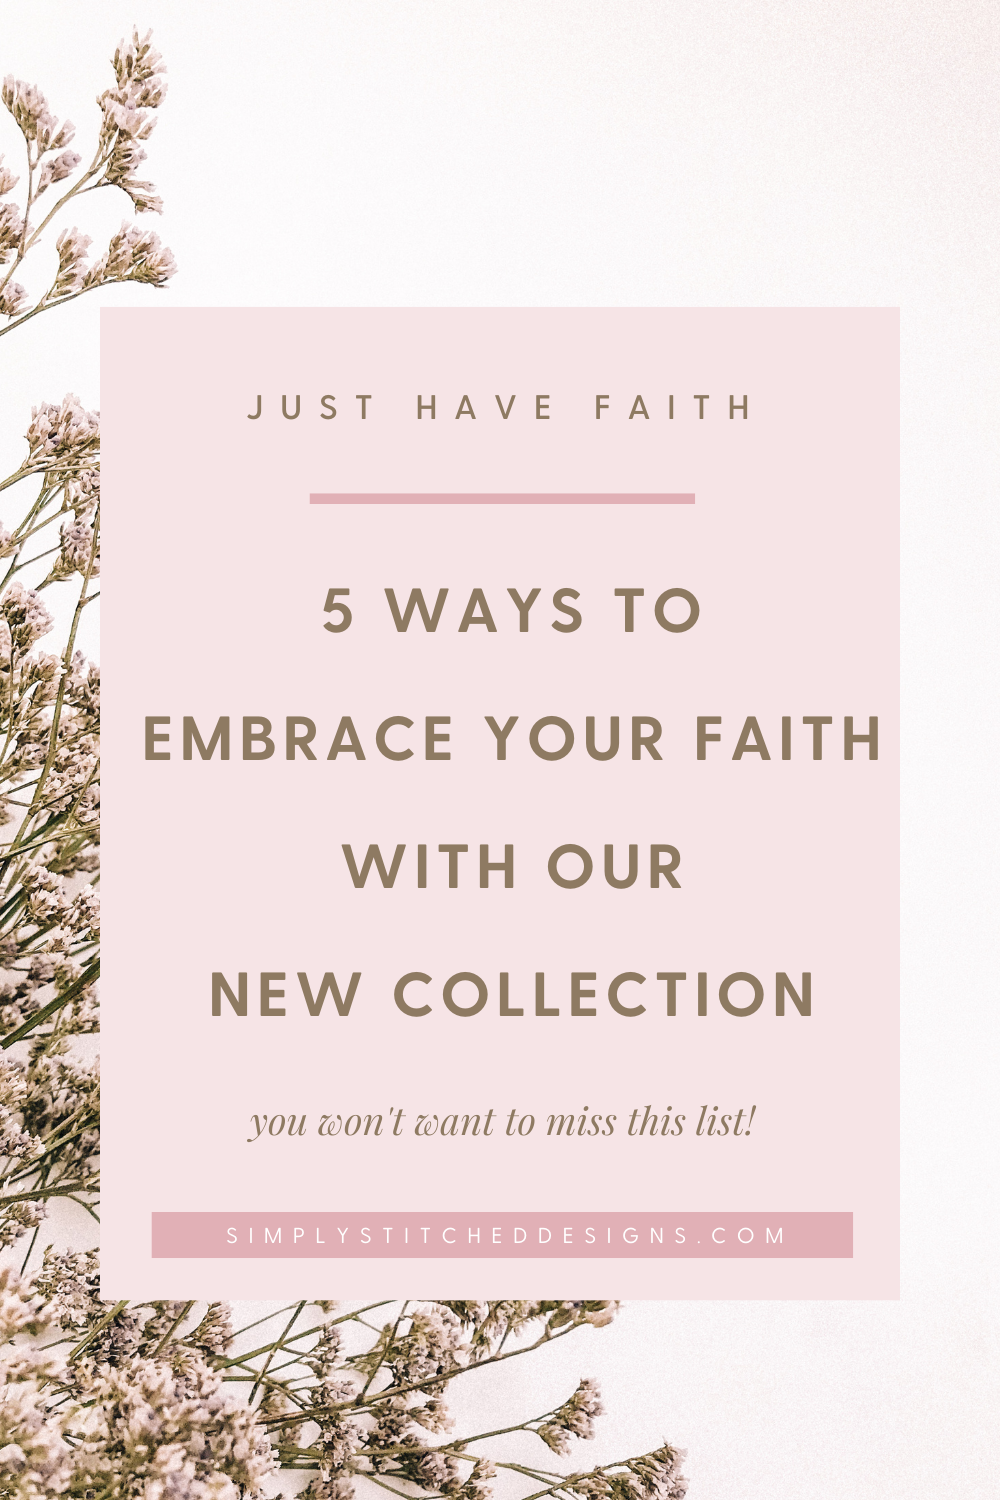 5 Ways To Embrace Your Faith With Our Newest Collection